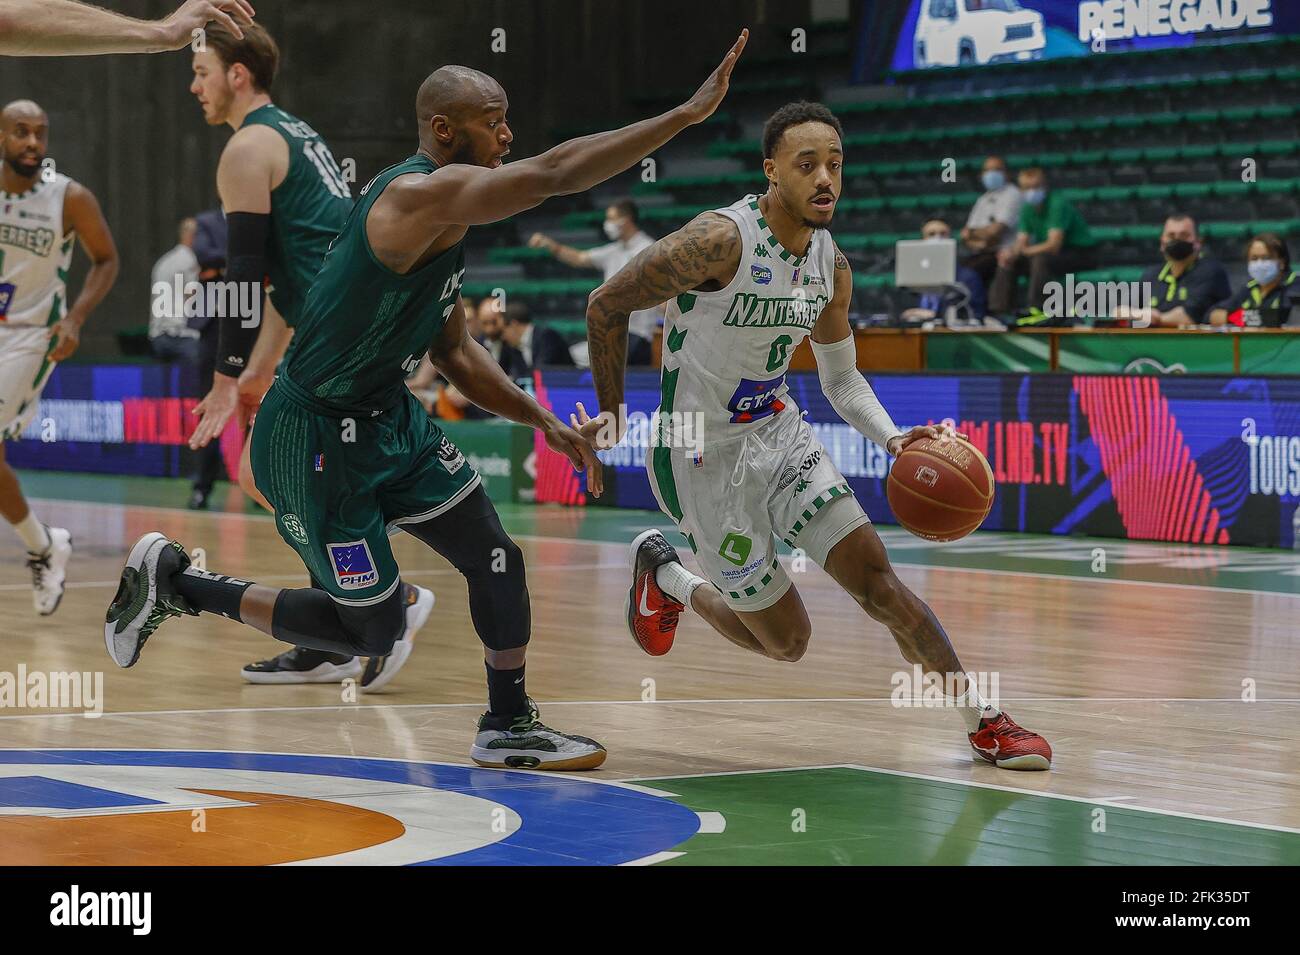 REED Marcquise of Nanterre 92 during the LNB Pro A Jeep Elite Nanterre 92 v  Limoges basketball match on April 27, 2021 at Palais des Sports in  Nanterre, France. Photo by Loic